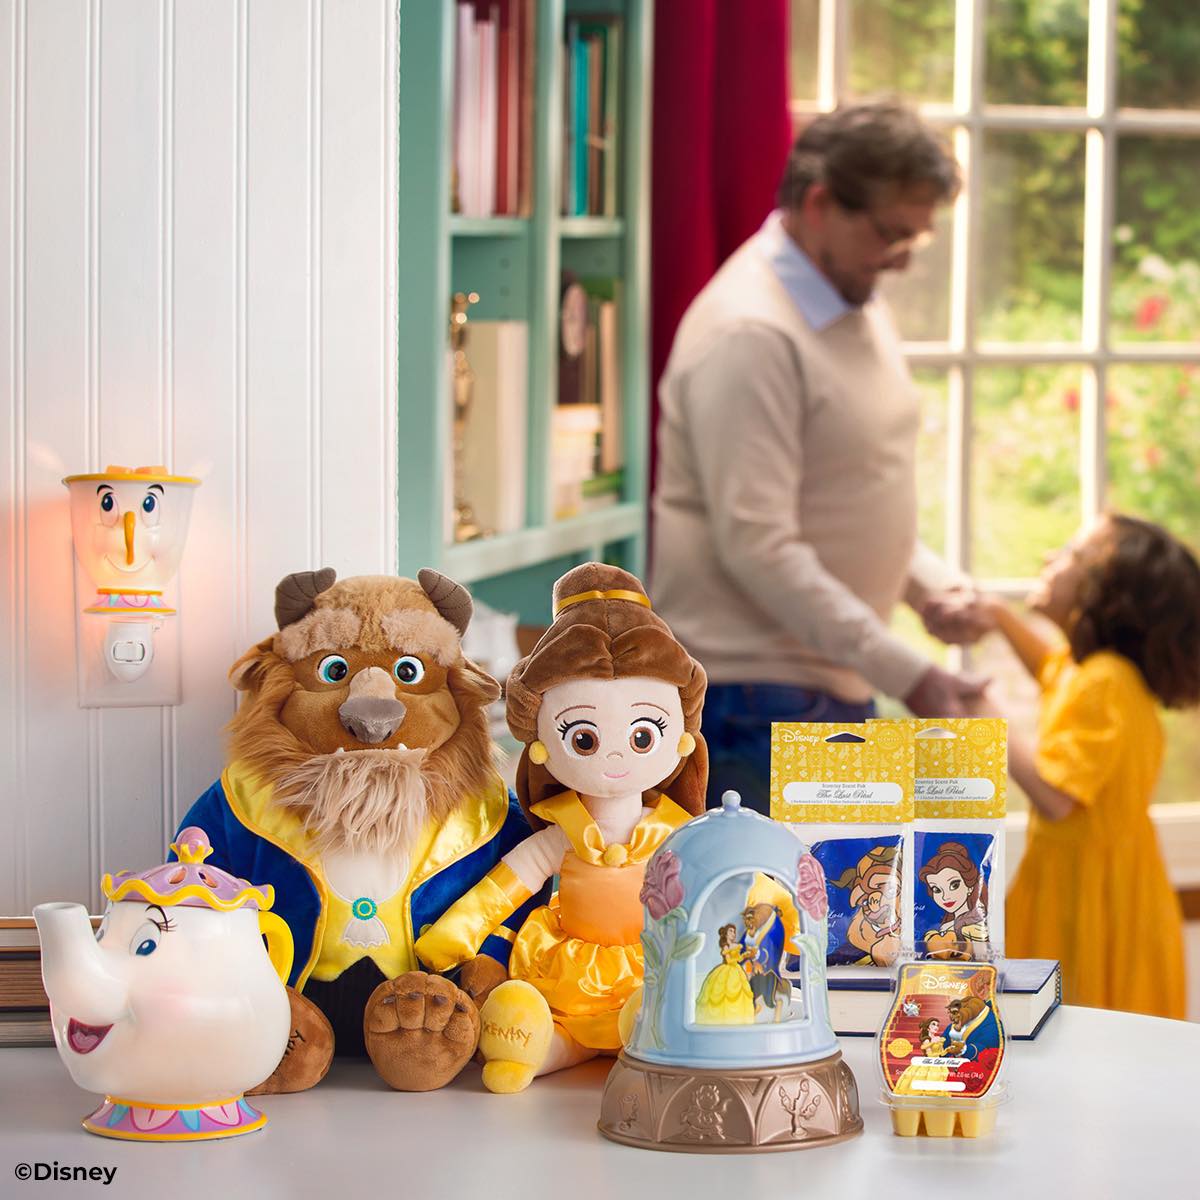 Disney Beauty and the Beast Collection from Scentsy is Coming Soon